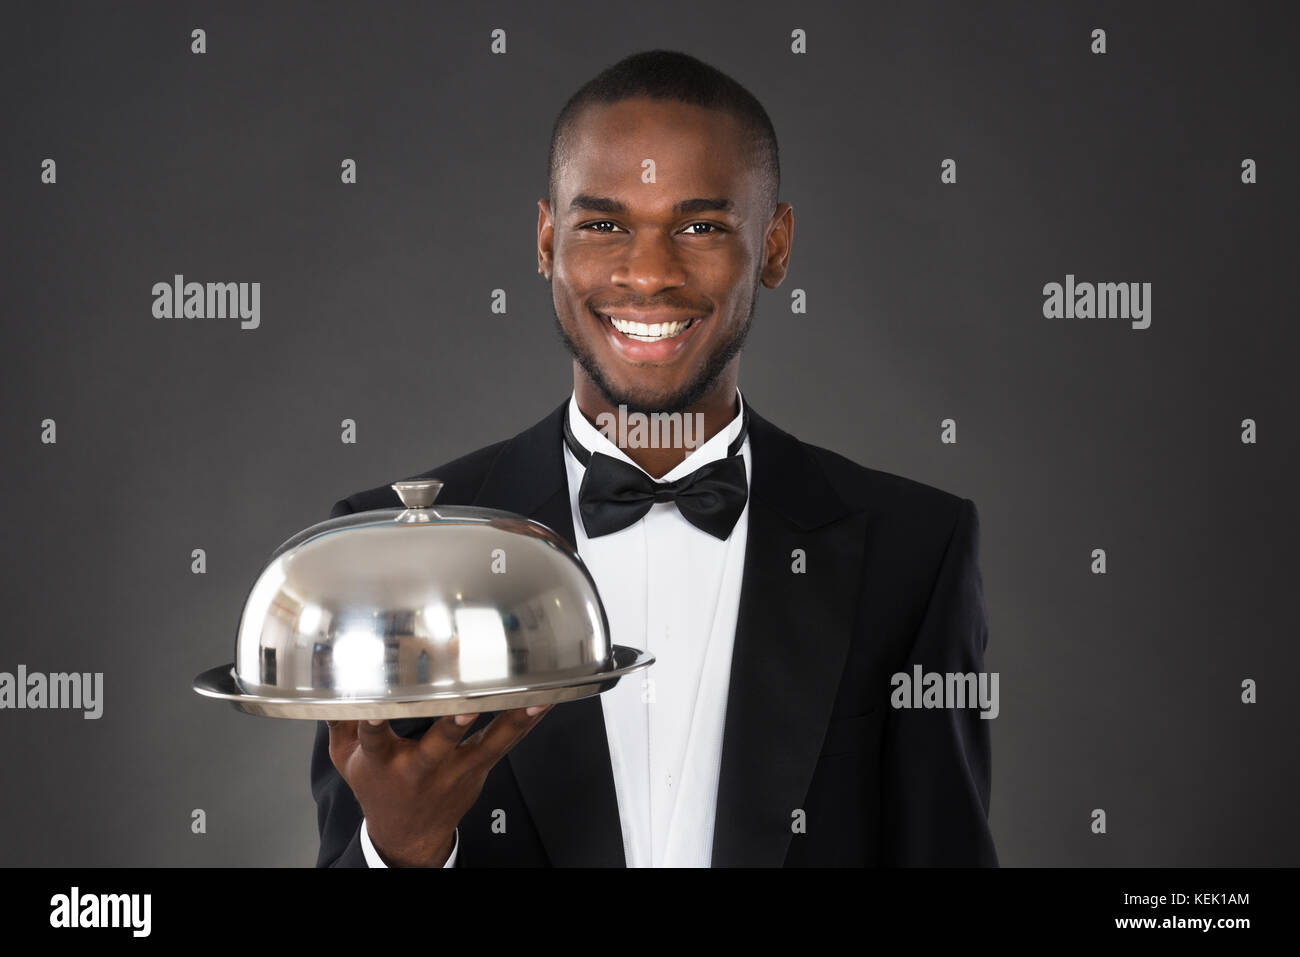 Portrait Of Happy Waiter Serving Meal In Cloche Stock Photo